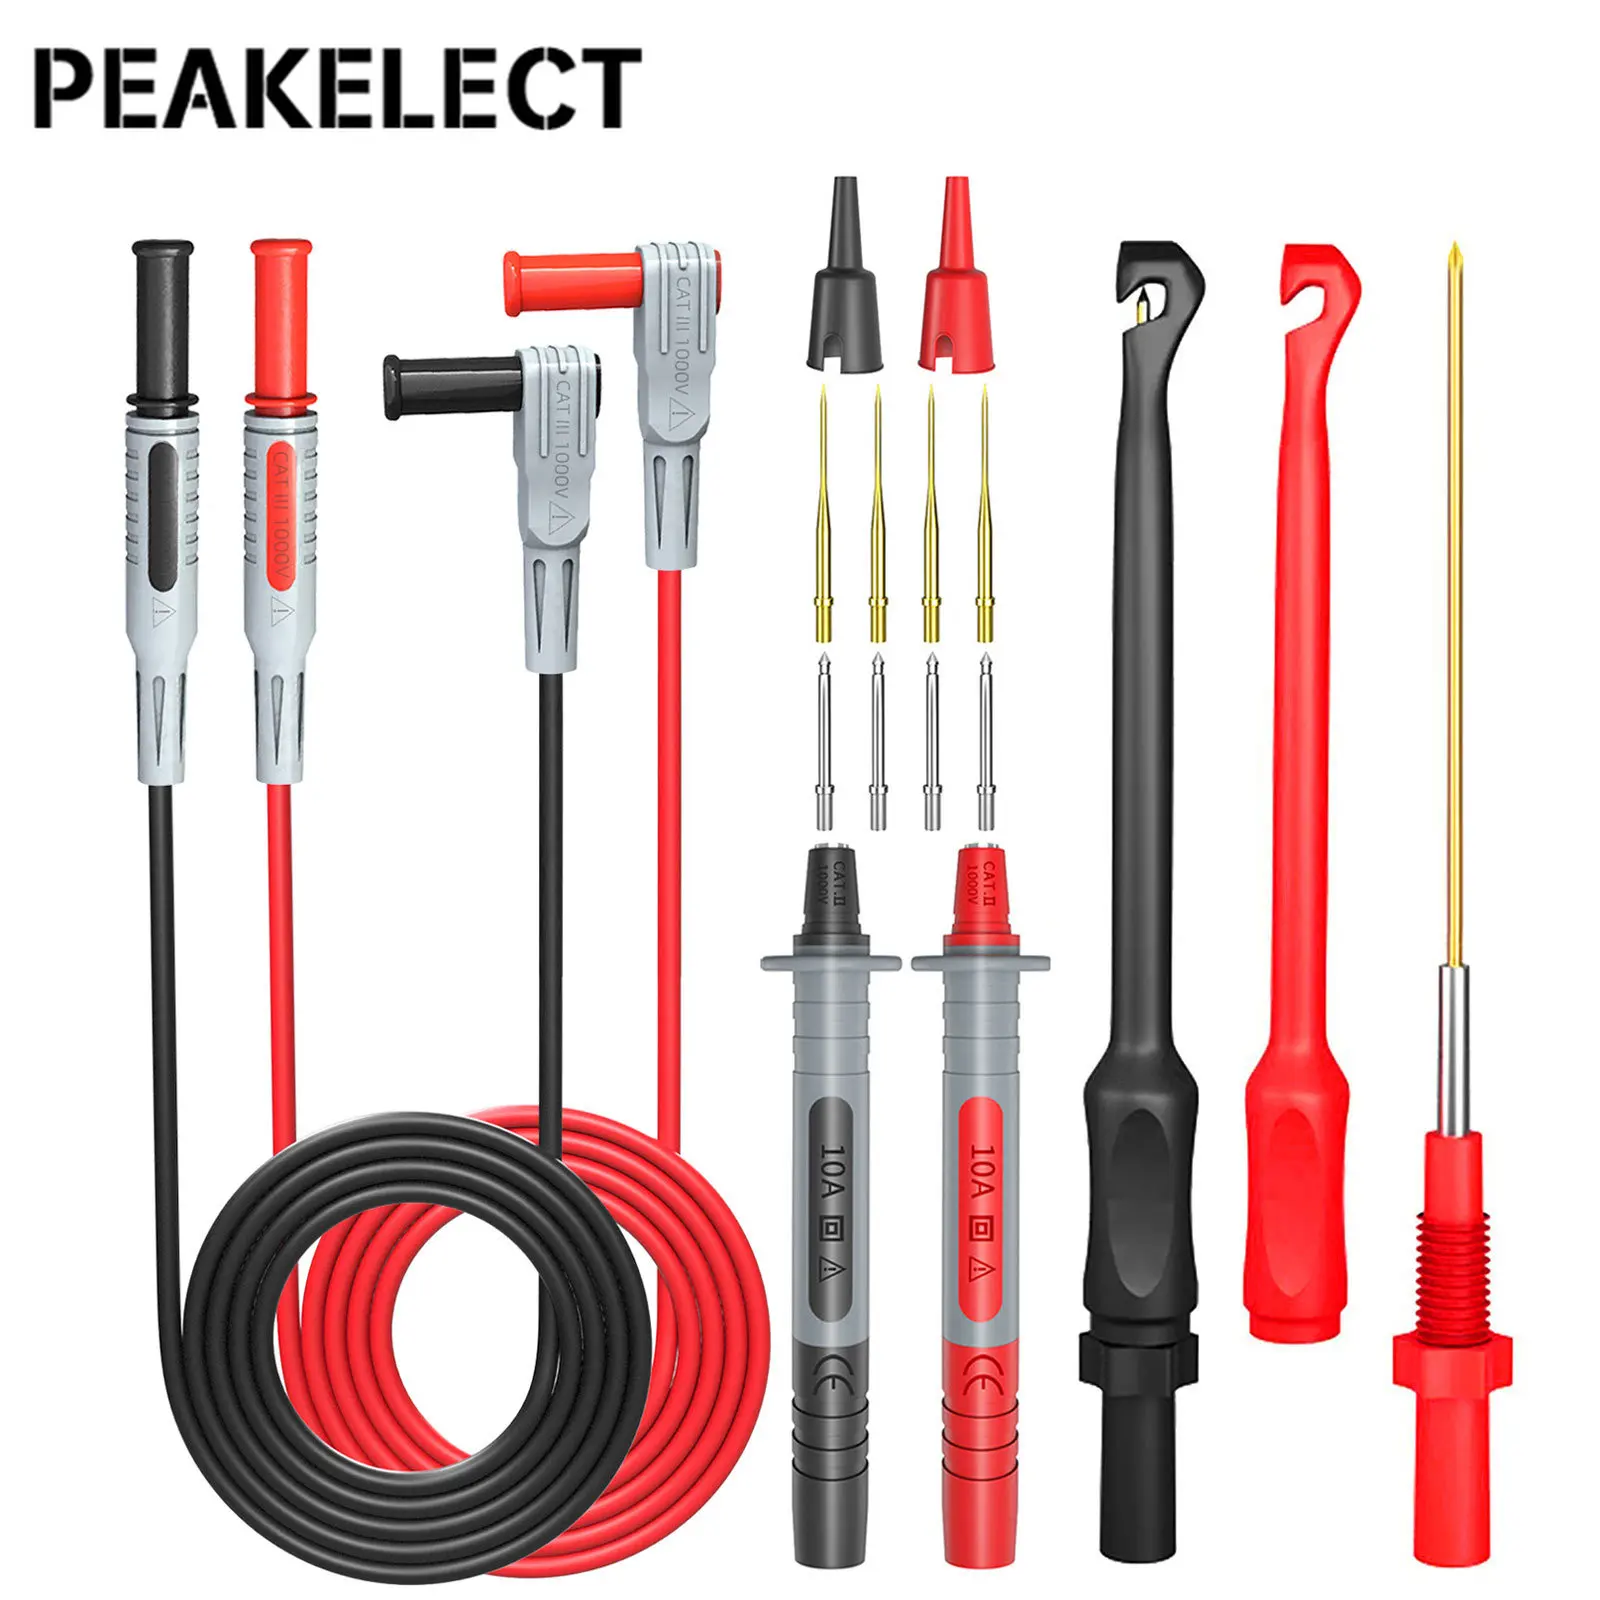 Peakelect P1033B Multimeter Test Probes Leads Kit with Wire Piercing Puncture 4mm Banana Plug Test Leads Test Probes peakelect p1033b multimeter test probes leads kit with wire piercing puncture 4mm banana plug test leads test probes